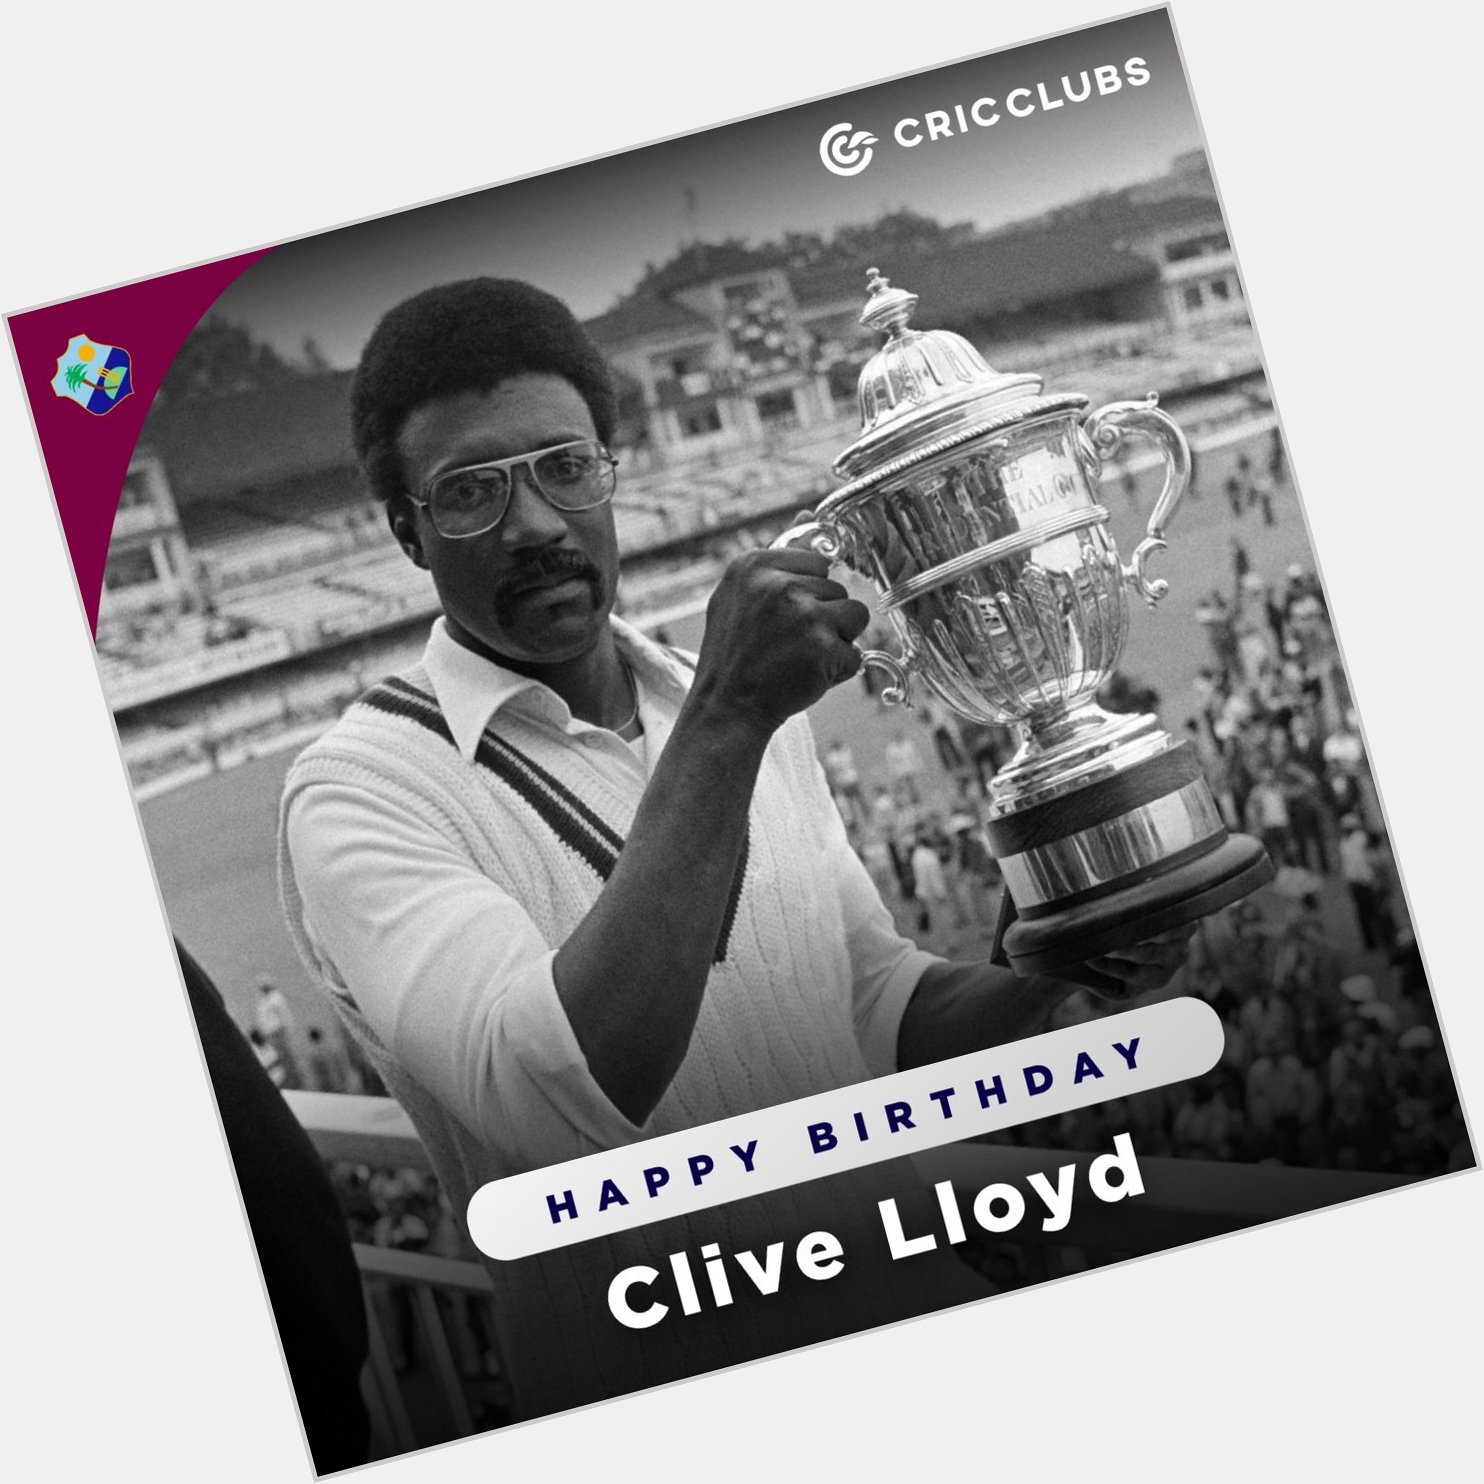 One of the most successful Test captains of all time
Two times ICC World Cup winner
Happy Birthday Sir Clive Lloyd 